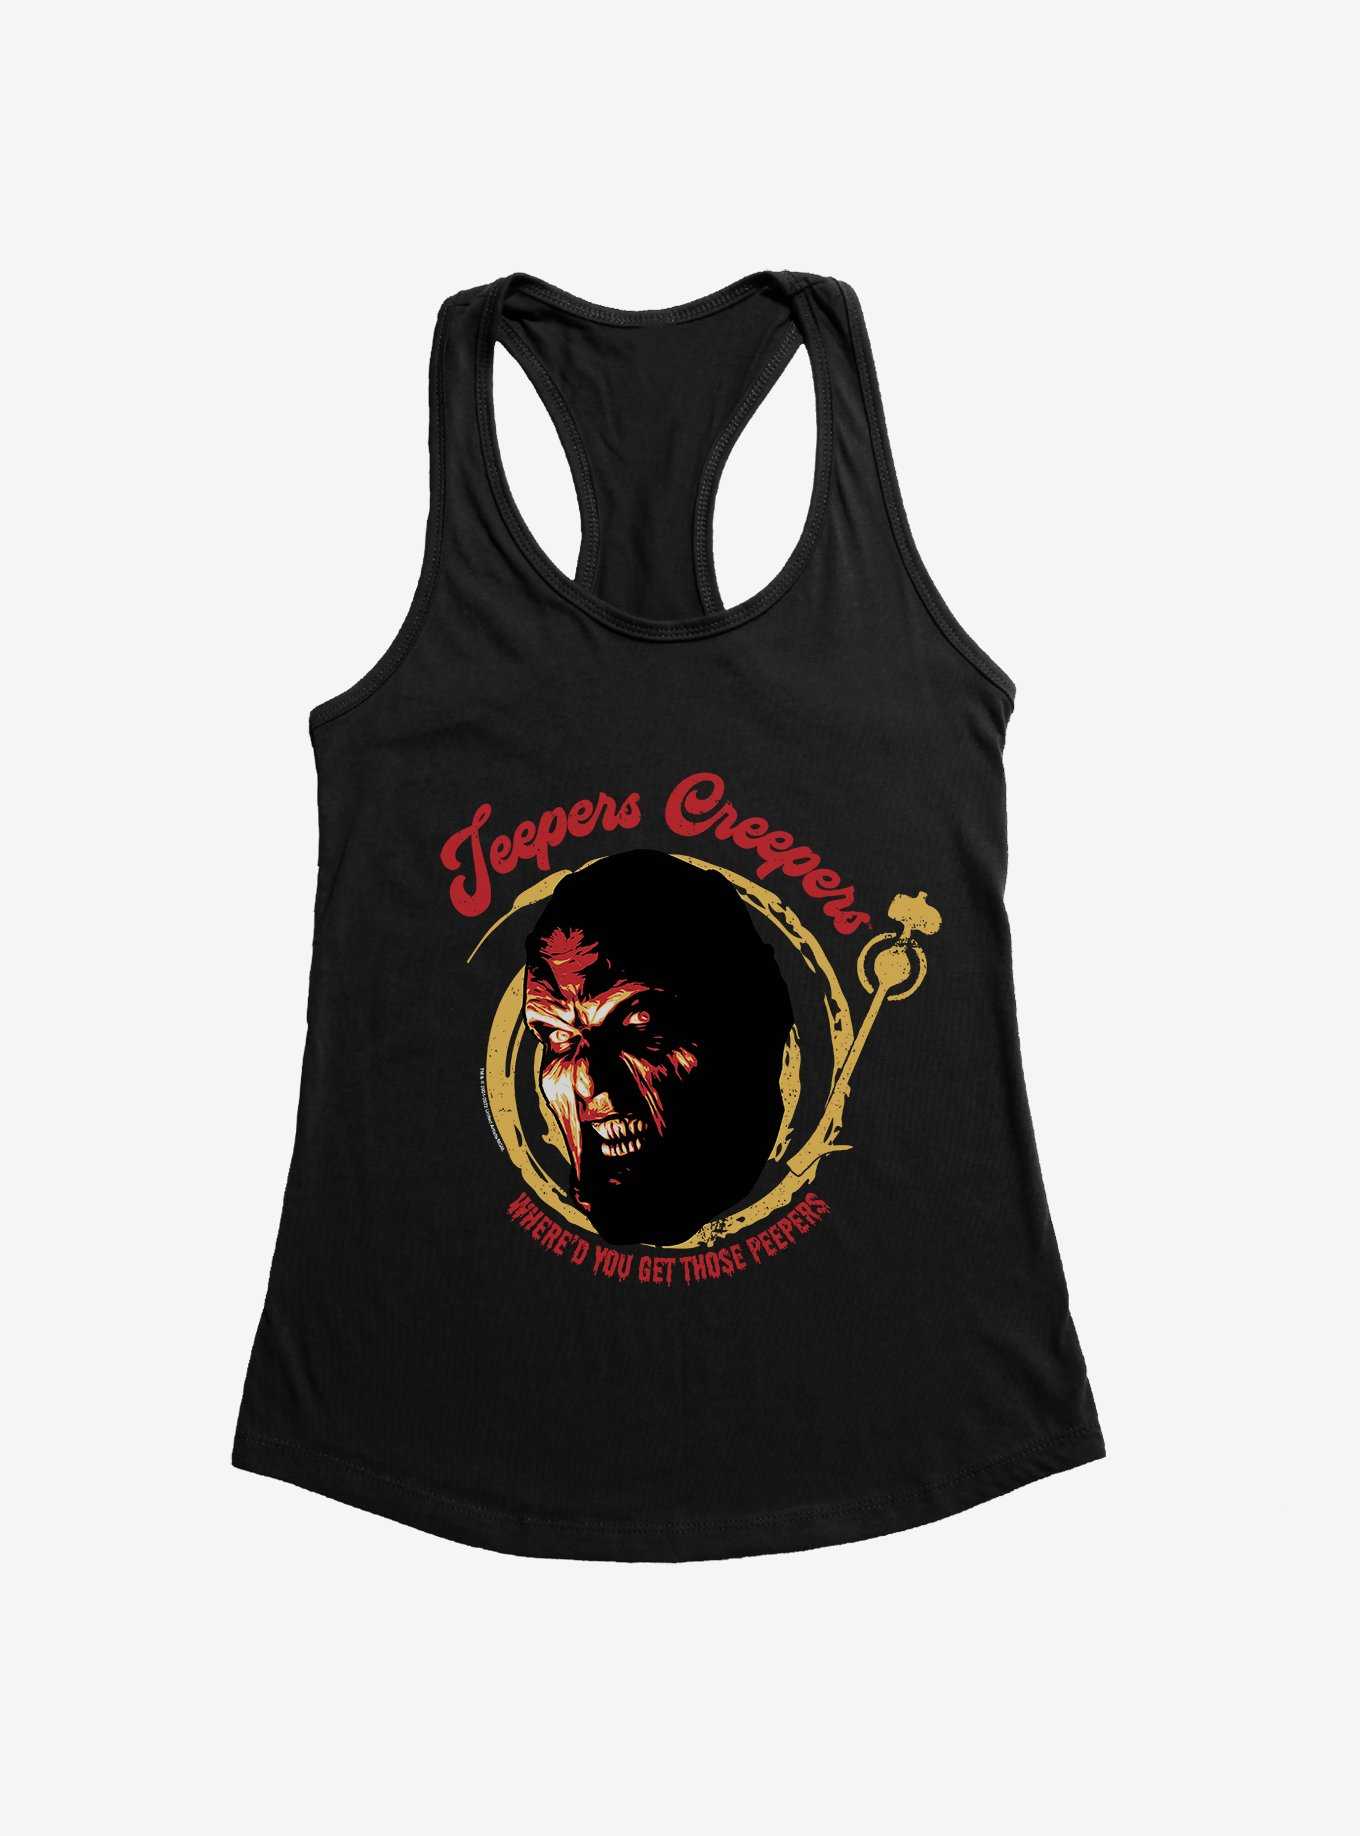 Jeepers Creepers Peepers Girls Tank, , hi-res